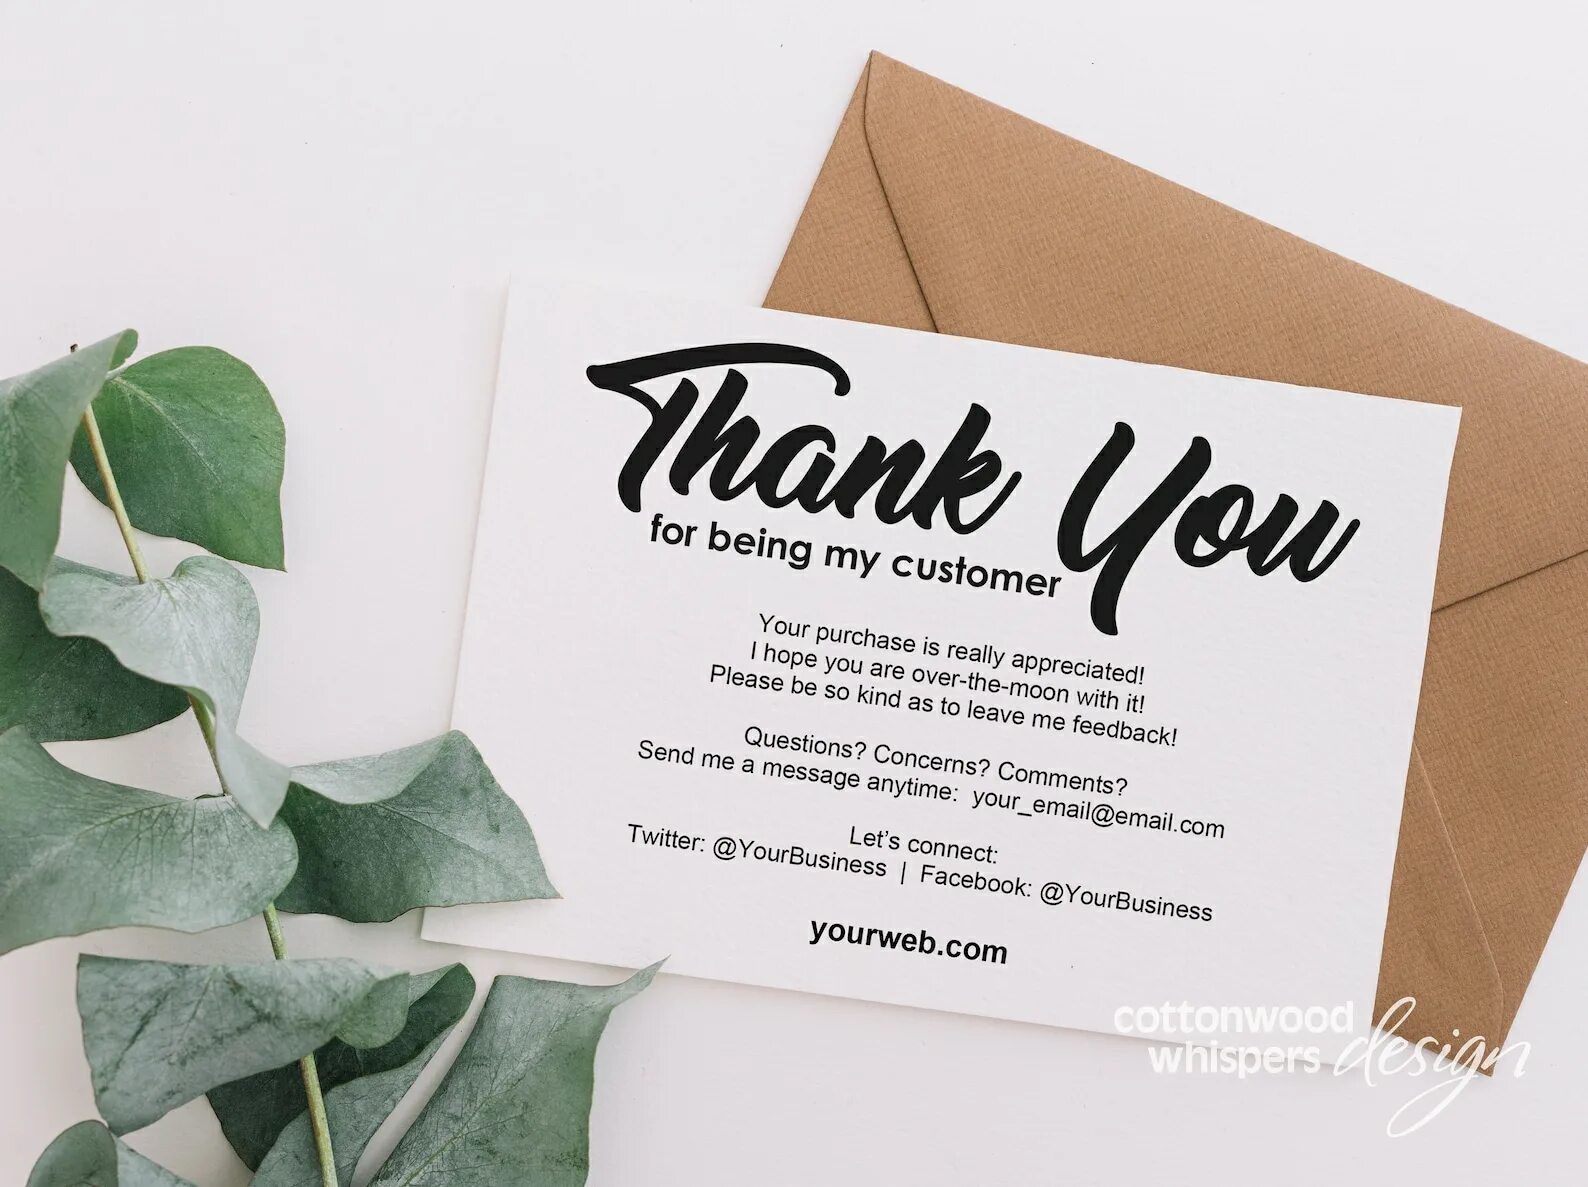 Purchasing card. Карточка thank you. Thank you Card for customer. Thank you for purchase. Thank you for purchase Cards.